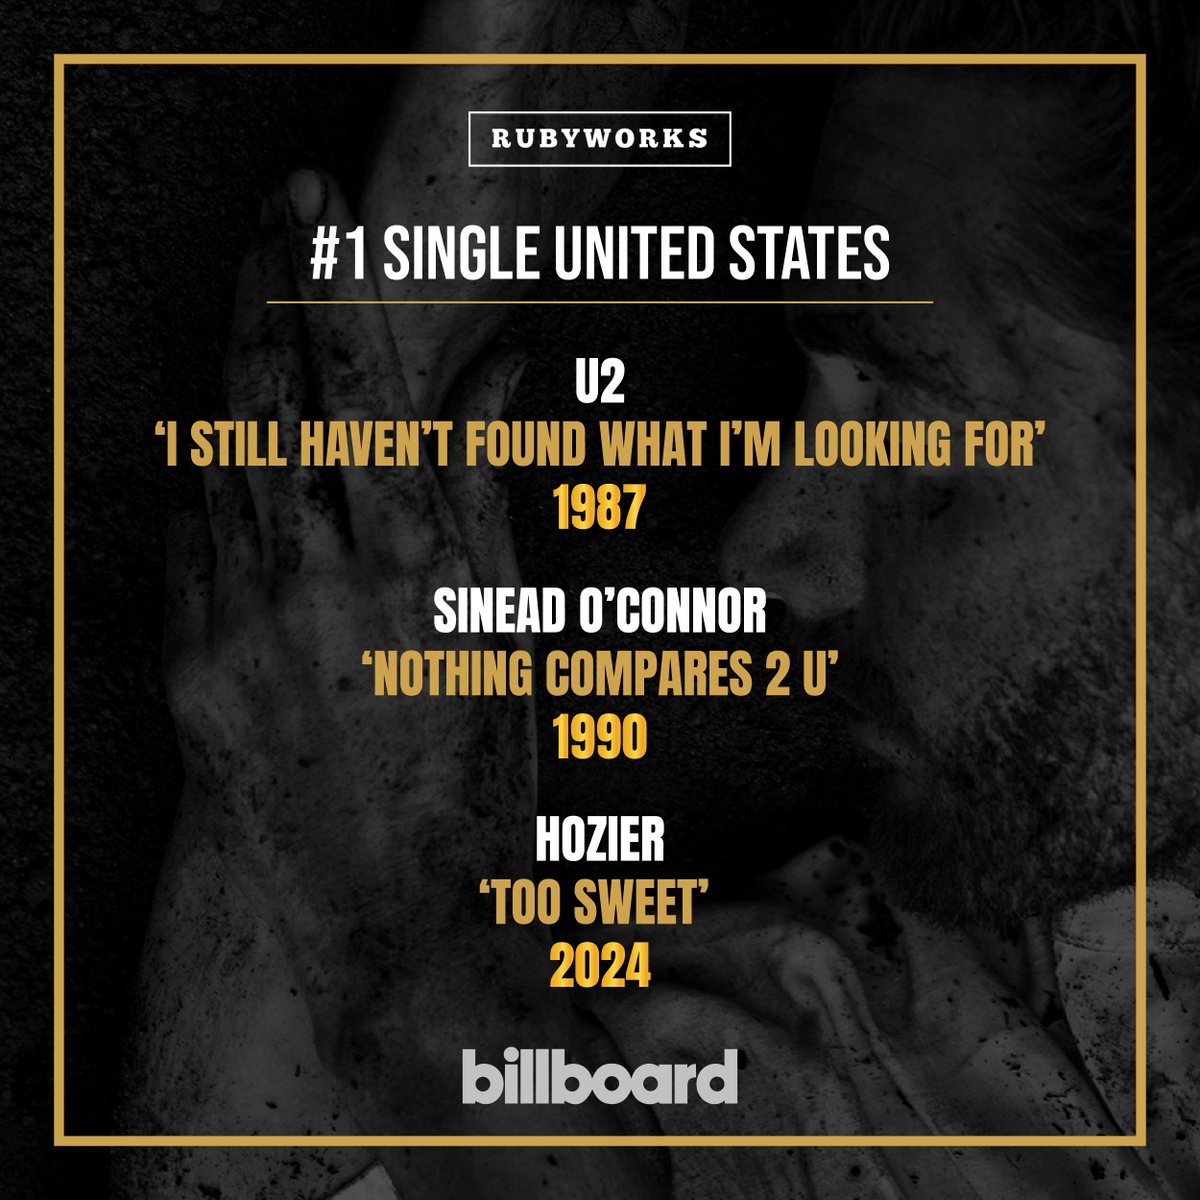 Another week, another massive congratulations to @Hozier - ‘Too Sweet’ is #1 on the @billboardcharts Hot 100! 🎉 Making him the 4th ever Irish artist to top the Billboard Hot 100 since Sinead O'Connor in 1990 🎉